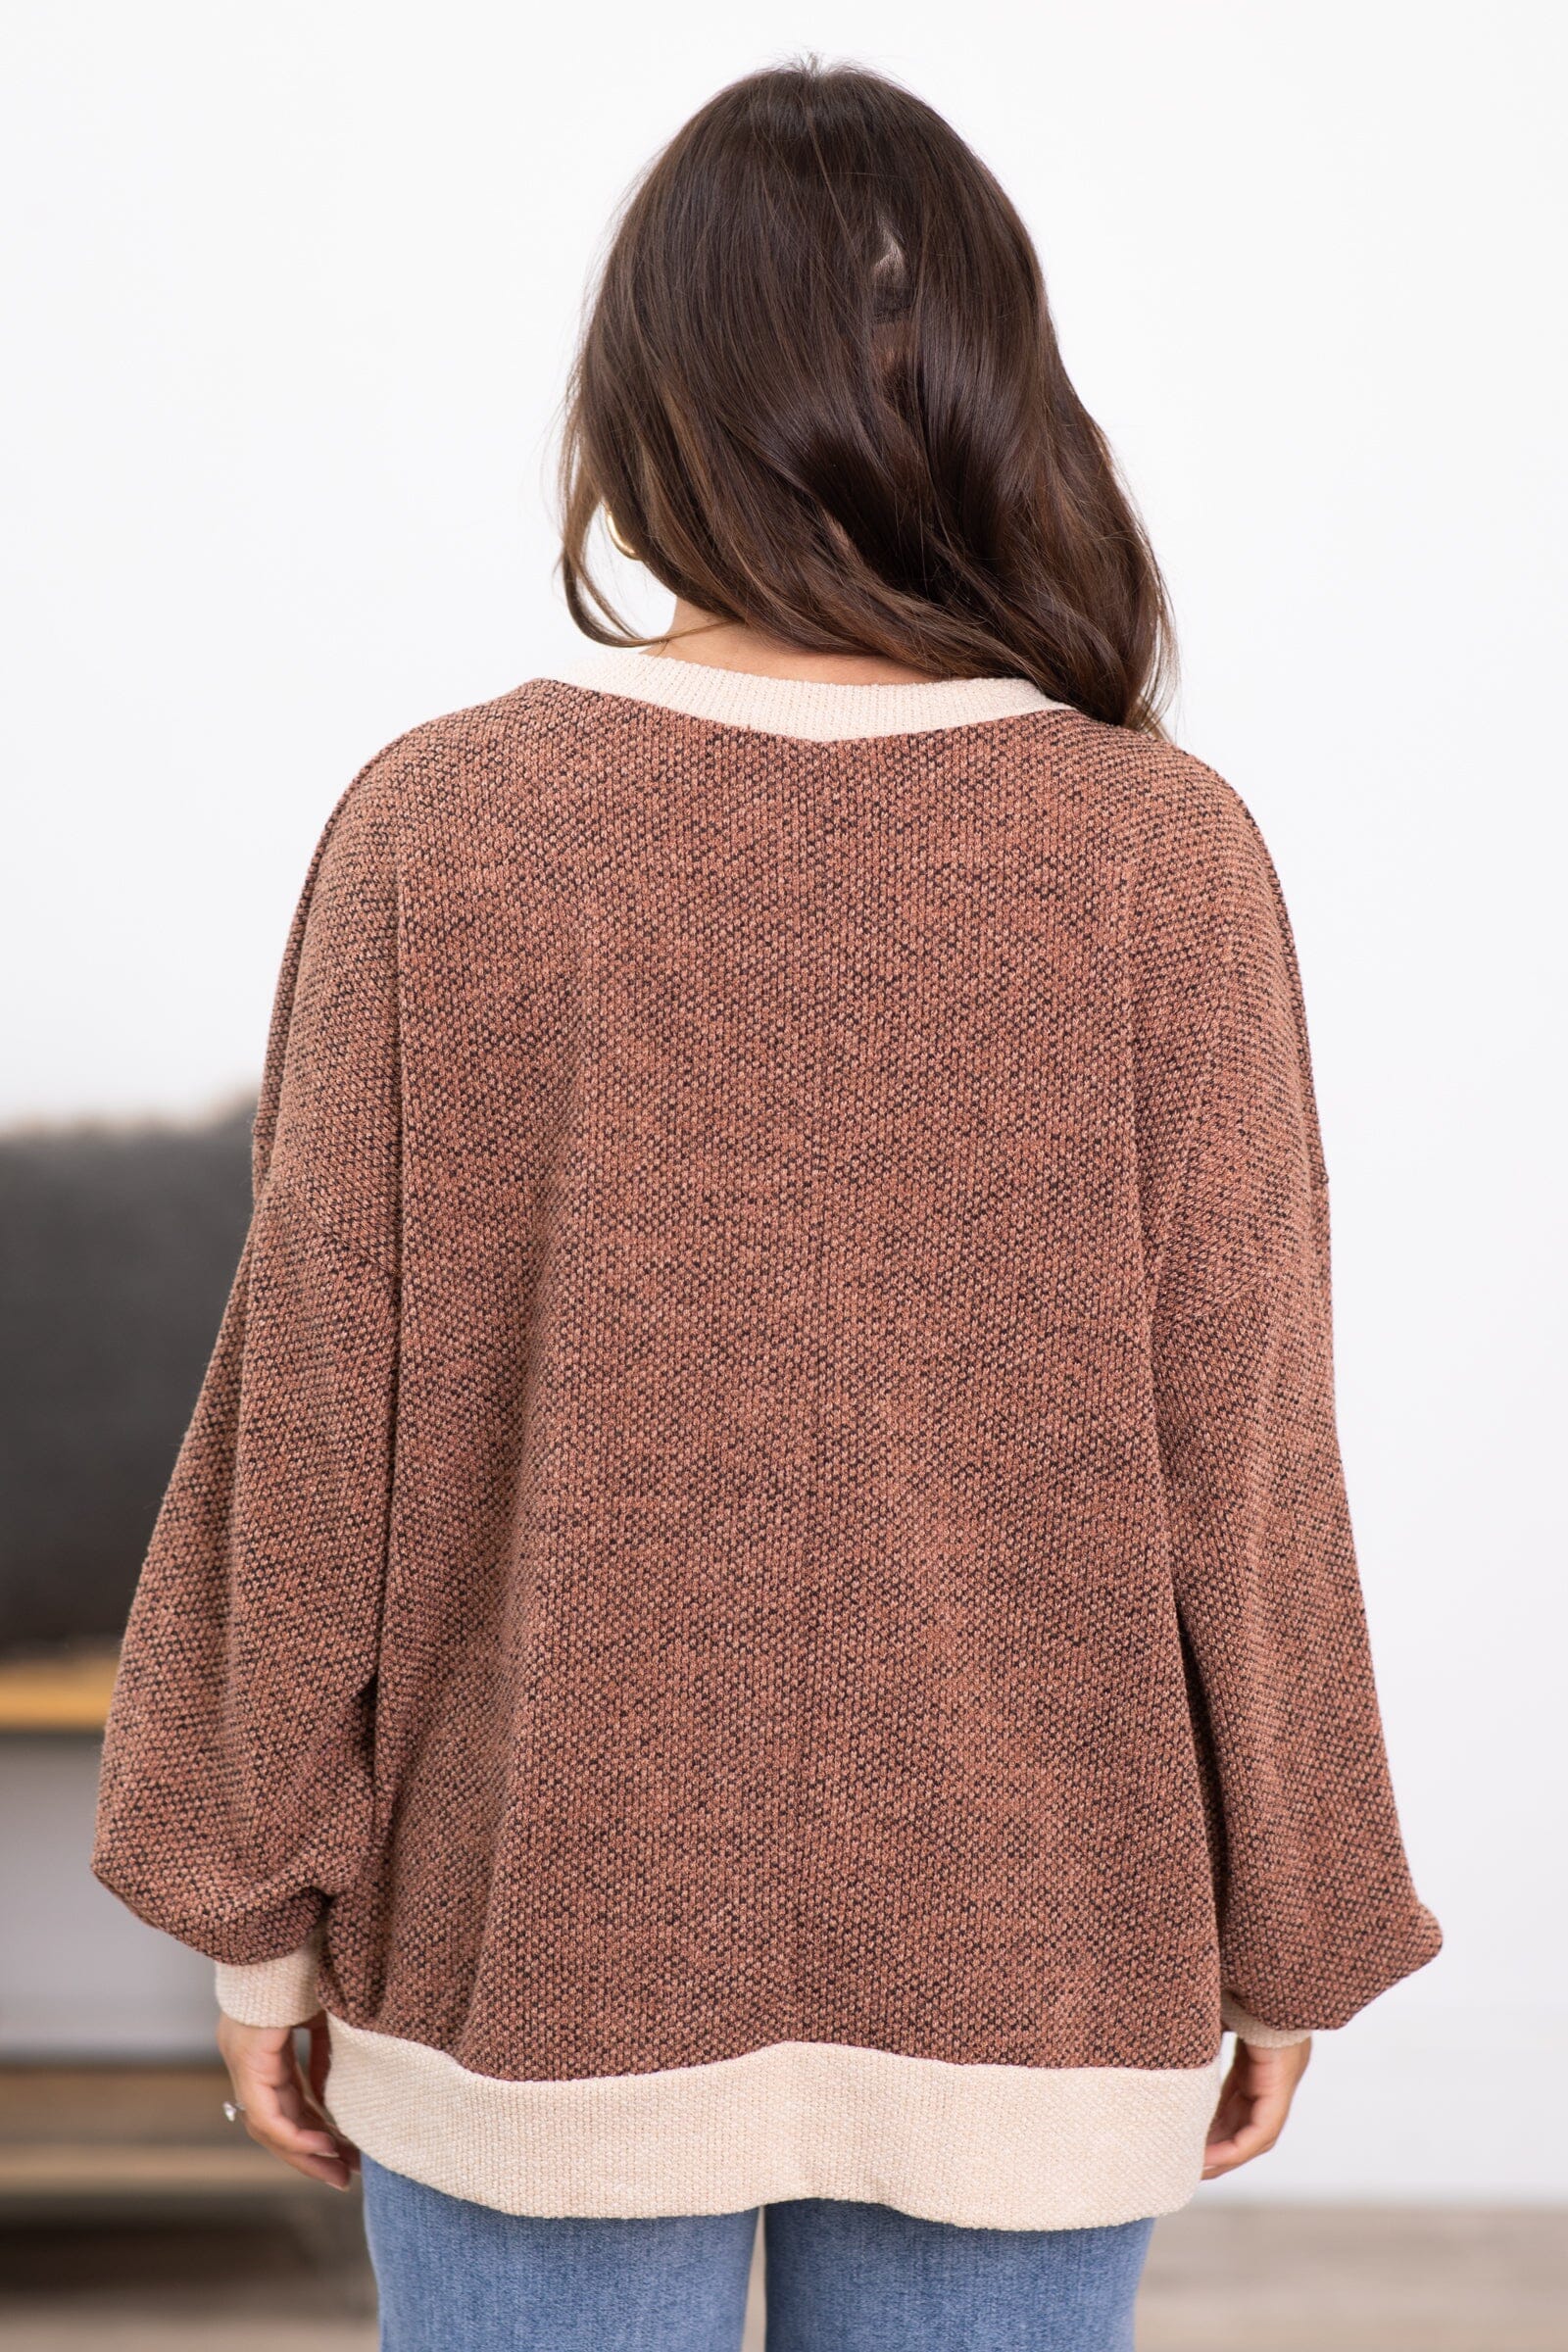 Light Brown Melange Top With Contrast Trim - Filly Flair